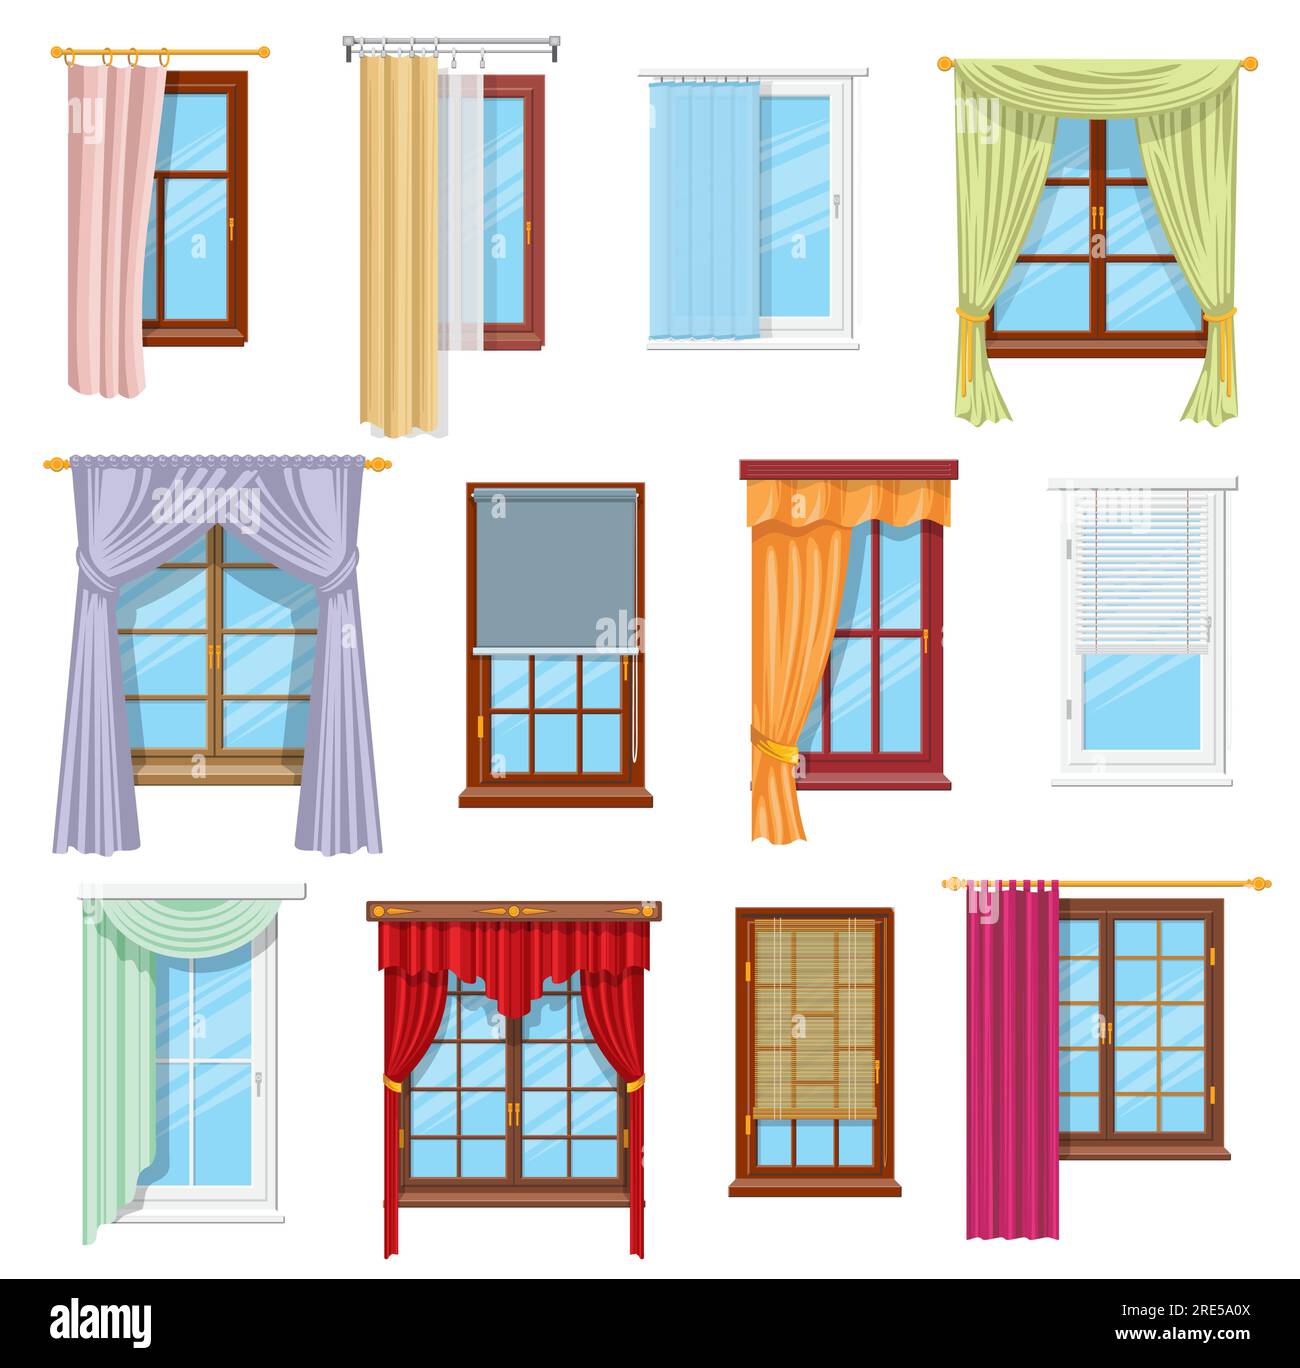 Window curtains, draperies, roller blinds and shades, vector home interior and window treatments design. Flat panel, tab top and sash curtains with rods and valances, vertical, venetian, roman blinds Stock Vector